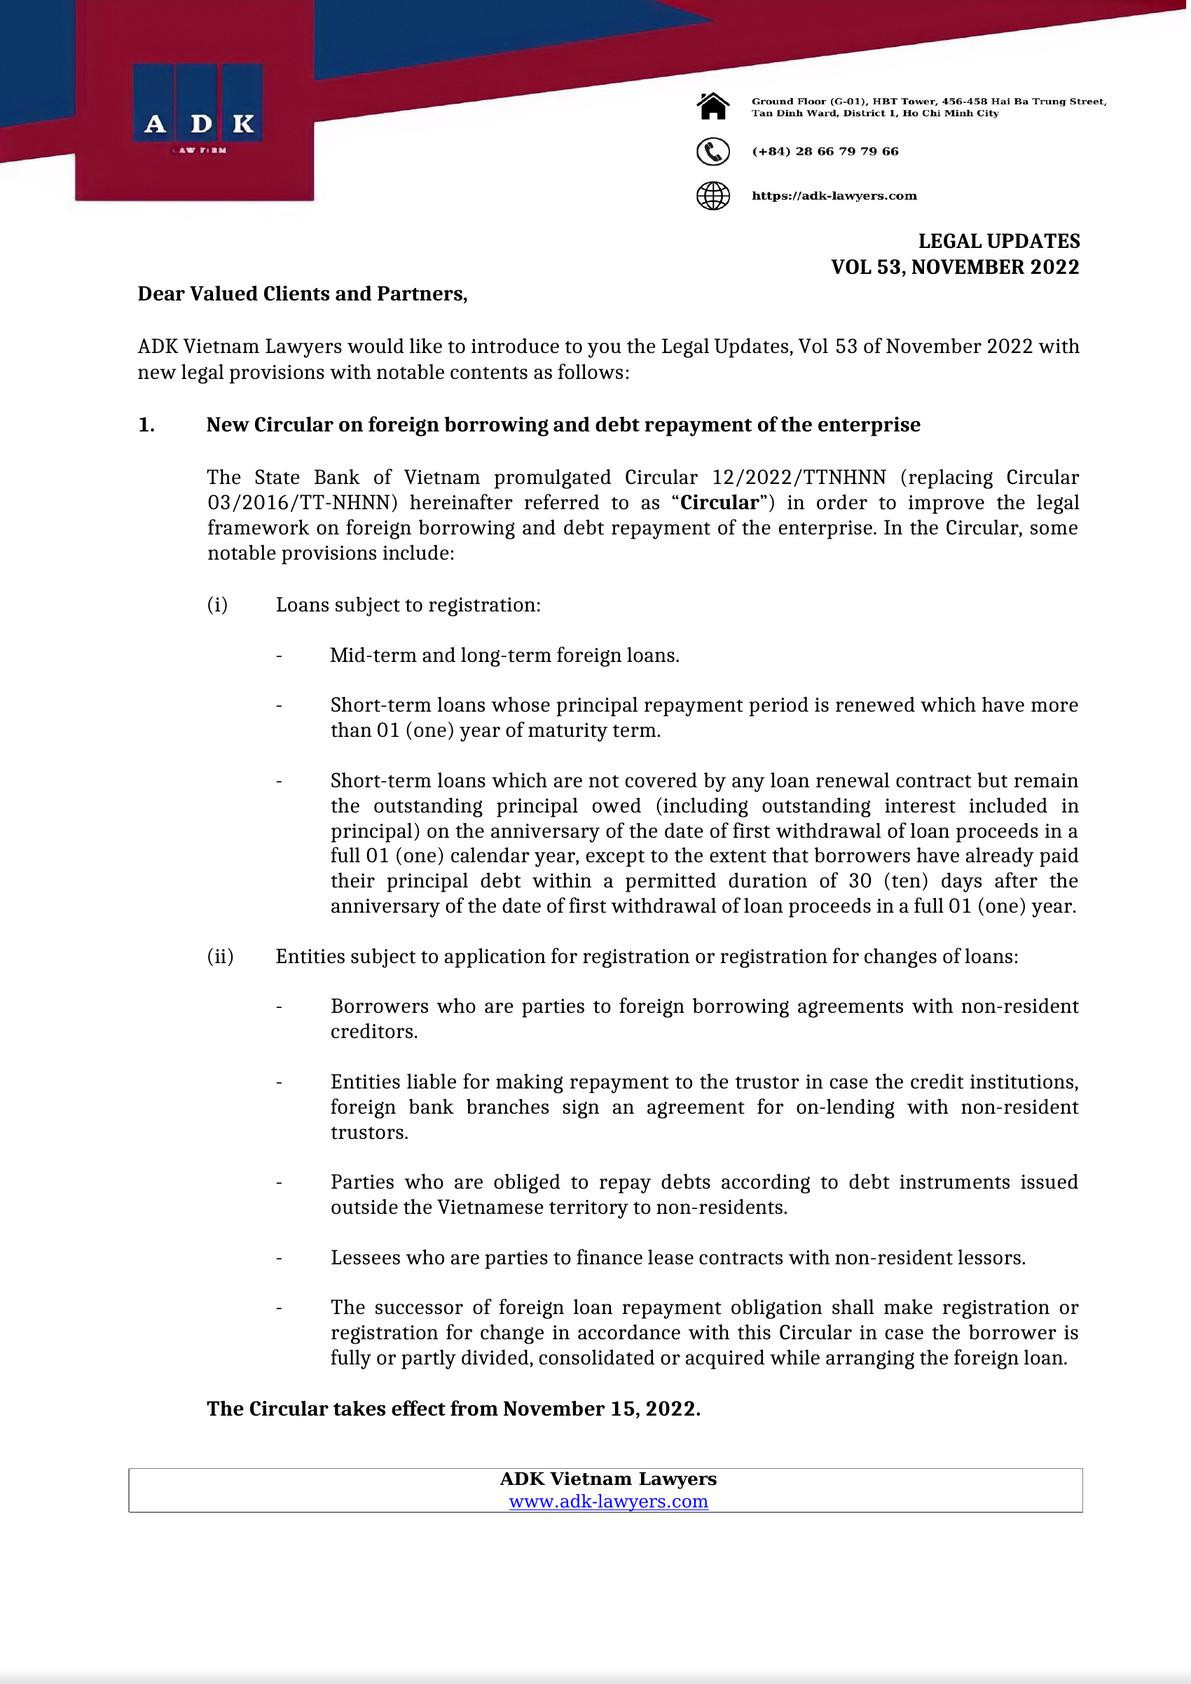 New Circular on foreign borrowing and debt repayment of the enterprise-0